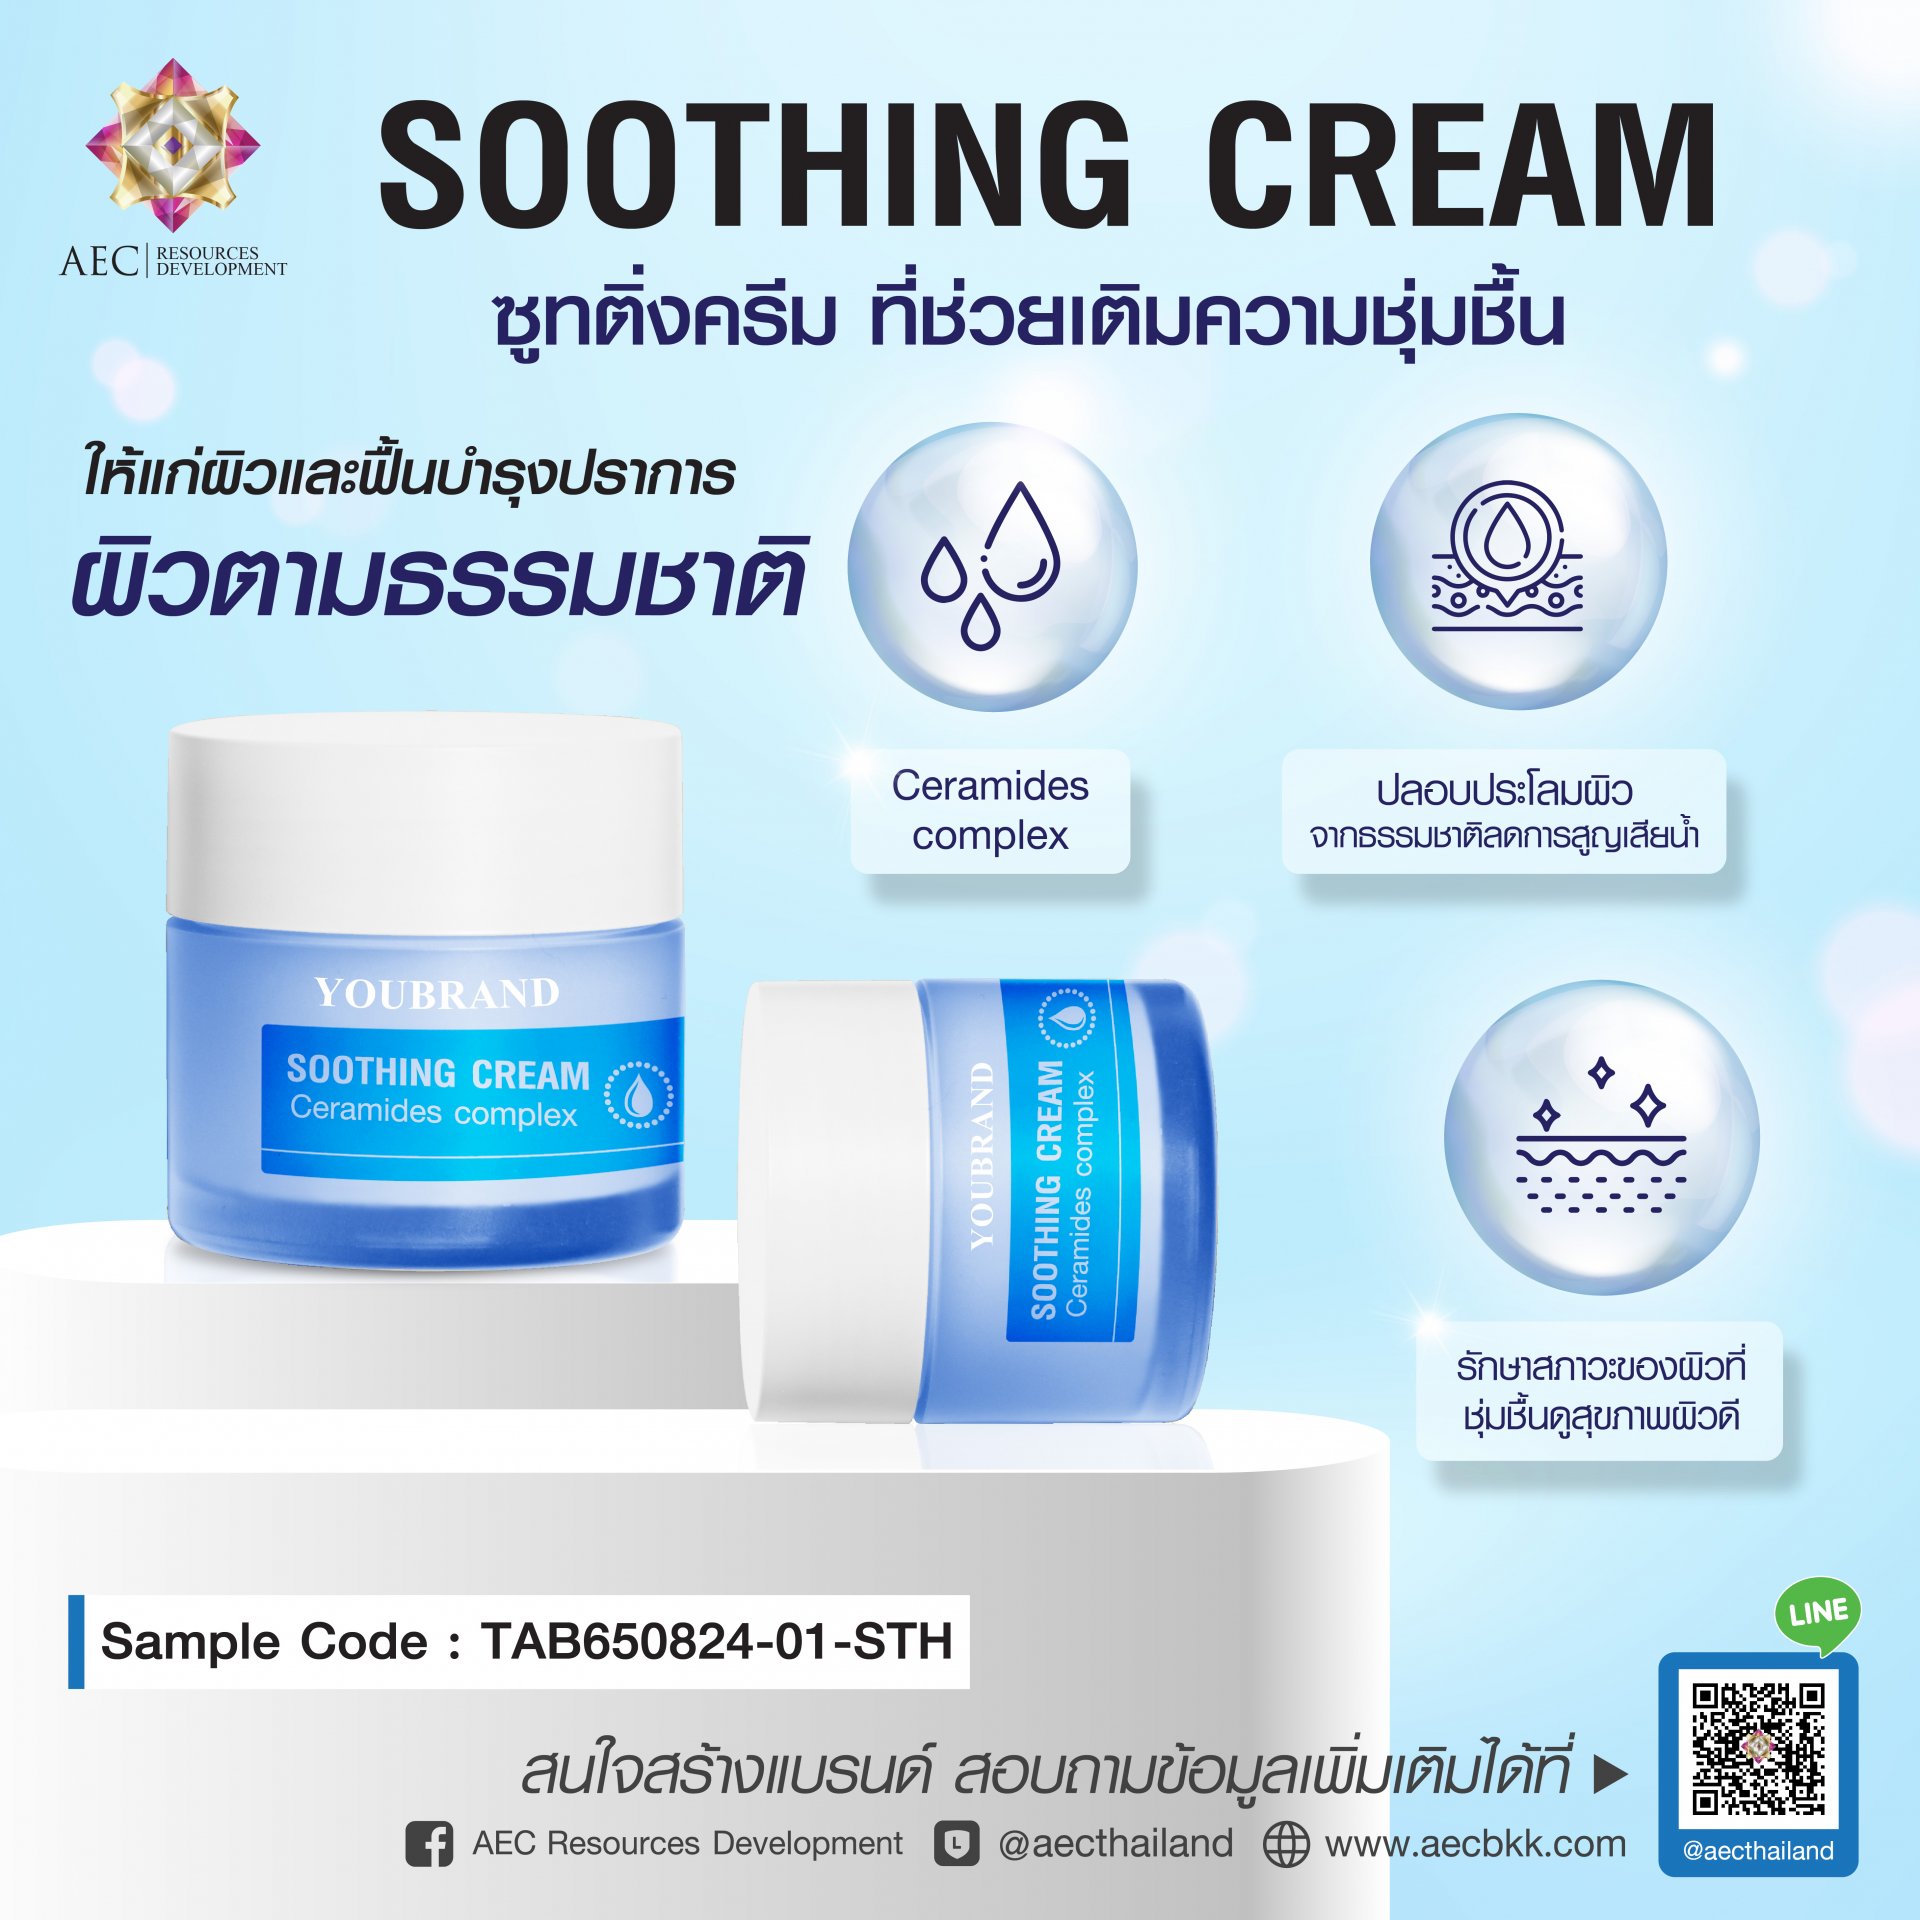 SOOTHING CREAM